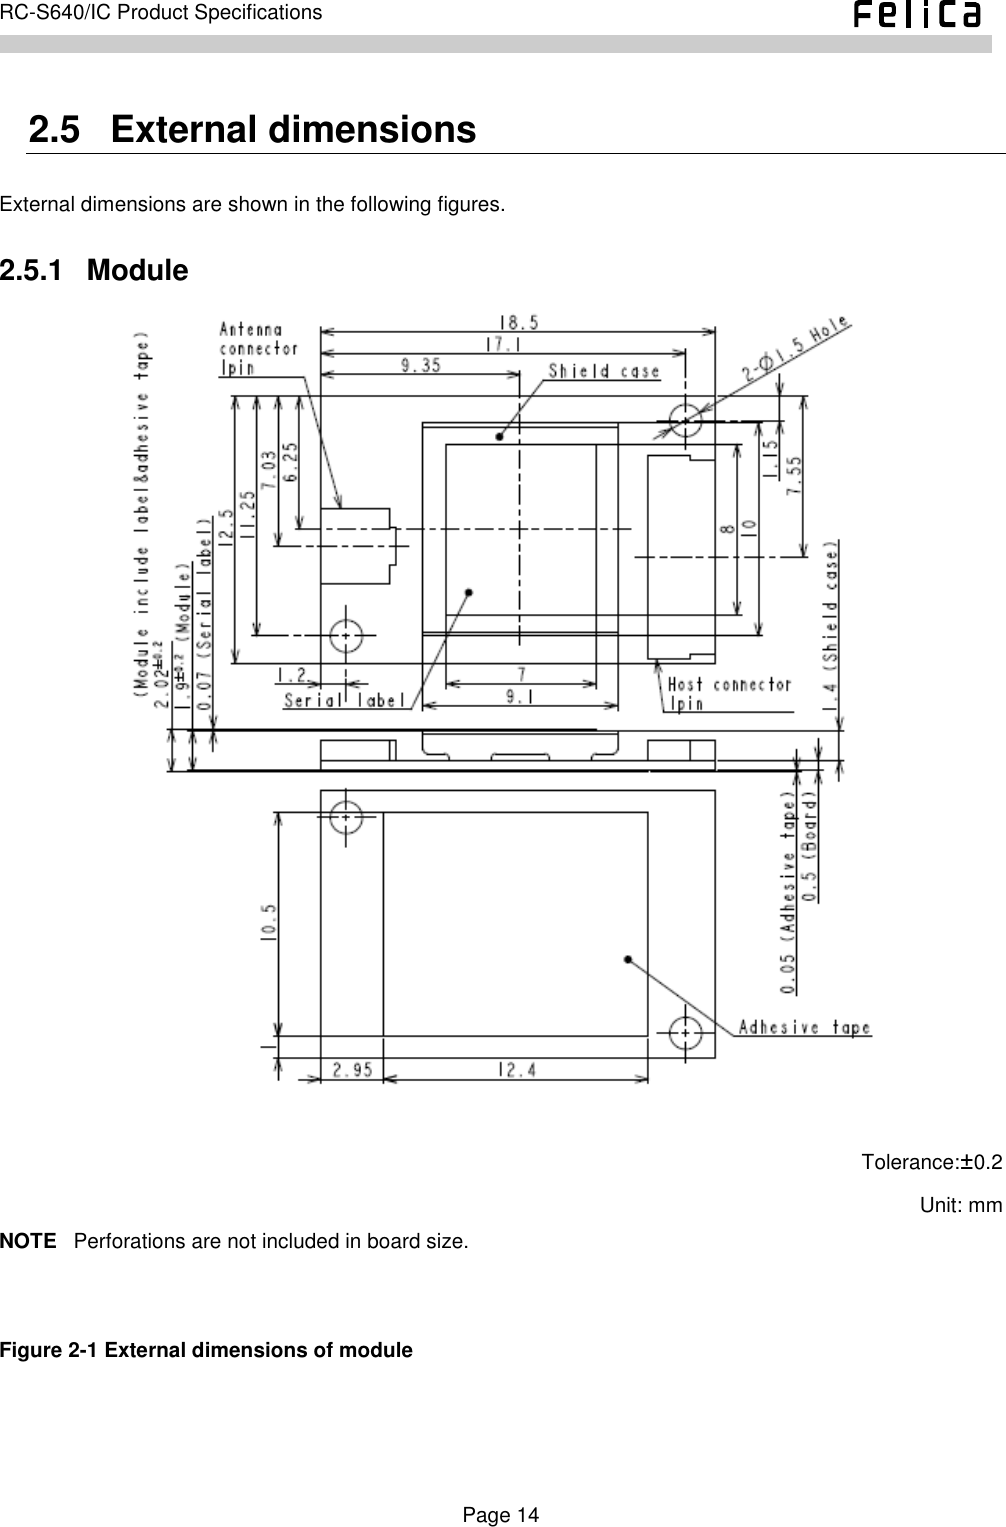    Page 14     RC-S640/IC Product Specifications    2.5   External dimensions External dimensions are shown in the following figures. 2.5.1   Module   Tolerance:±0.2 Unit: mm NOTE  Perforations are not included in board size.   Figure 2-1 External dimensions of module  